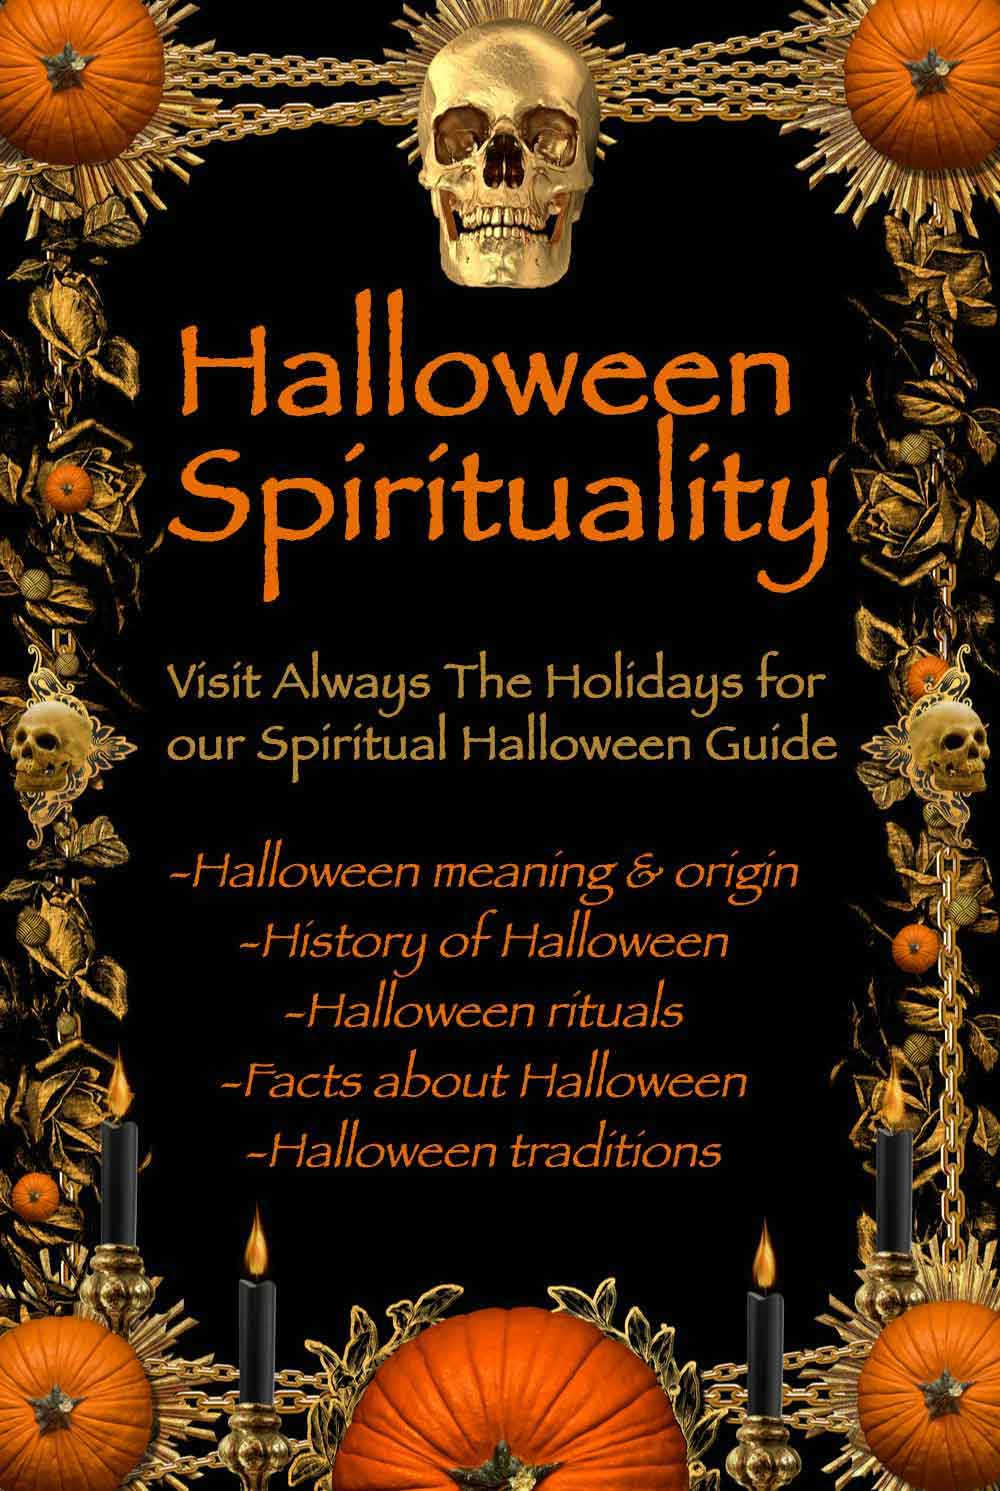 A black background with a border of skulls, pumpkins, chains, leaves and candles with a text overlay in the center reading "Halloween Spirituality - visit Always the Holidays for our spiritual Halloween guide - Halloween meaning & origin, history of Halloween, Halloween rituals, facts about Halloween, Halloween traditions".